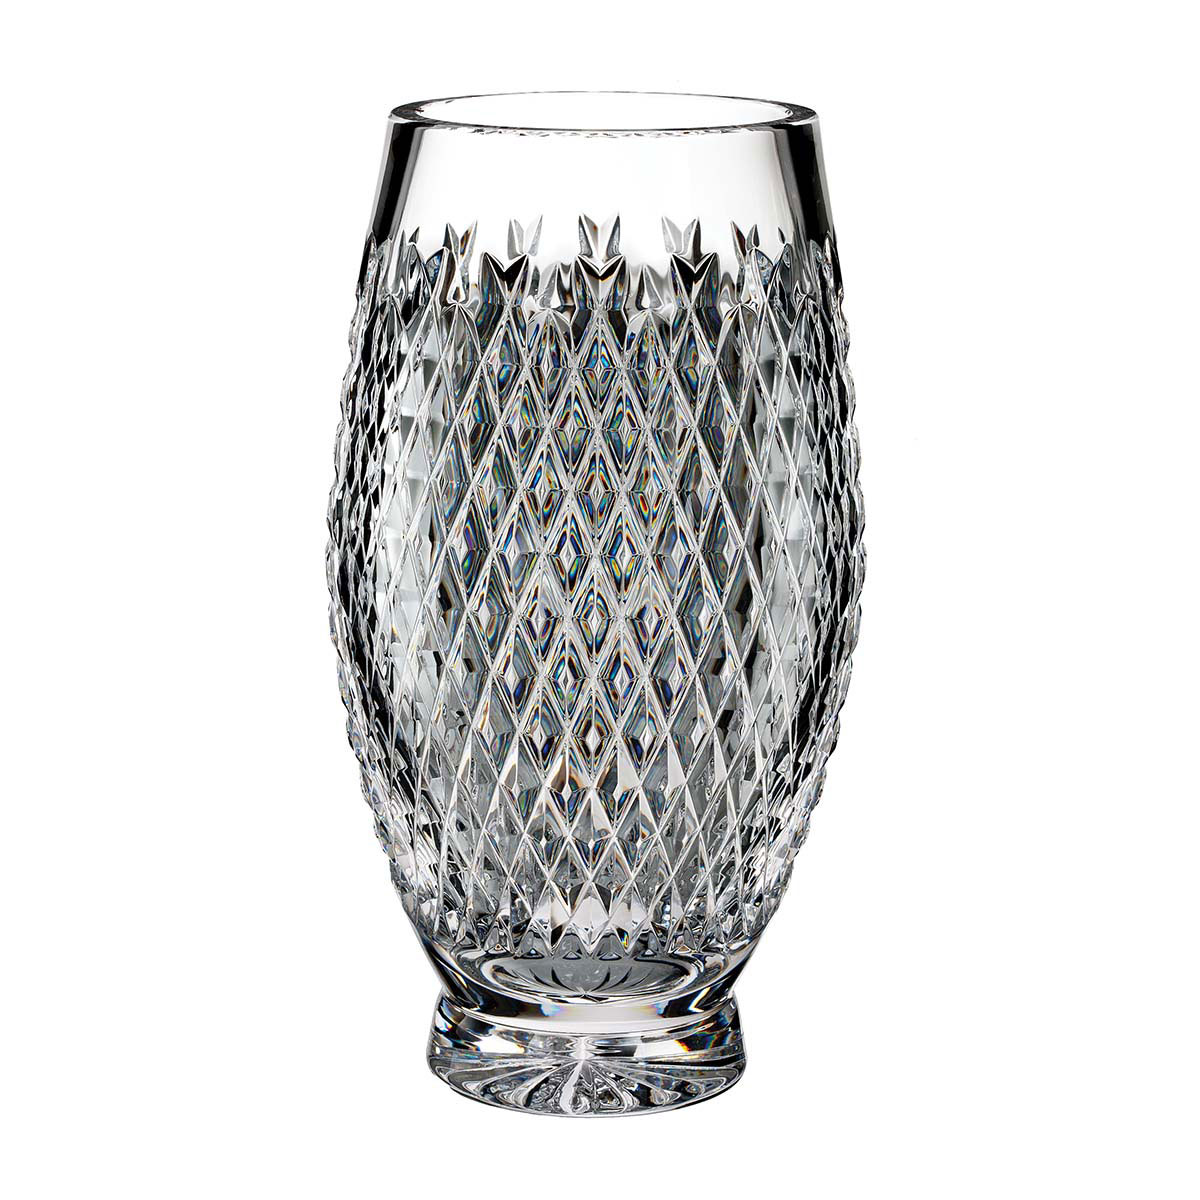 Waterford Crystal, House of Waterford Trilogy Alana 12" Crystal Vase